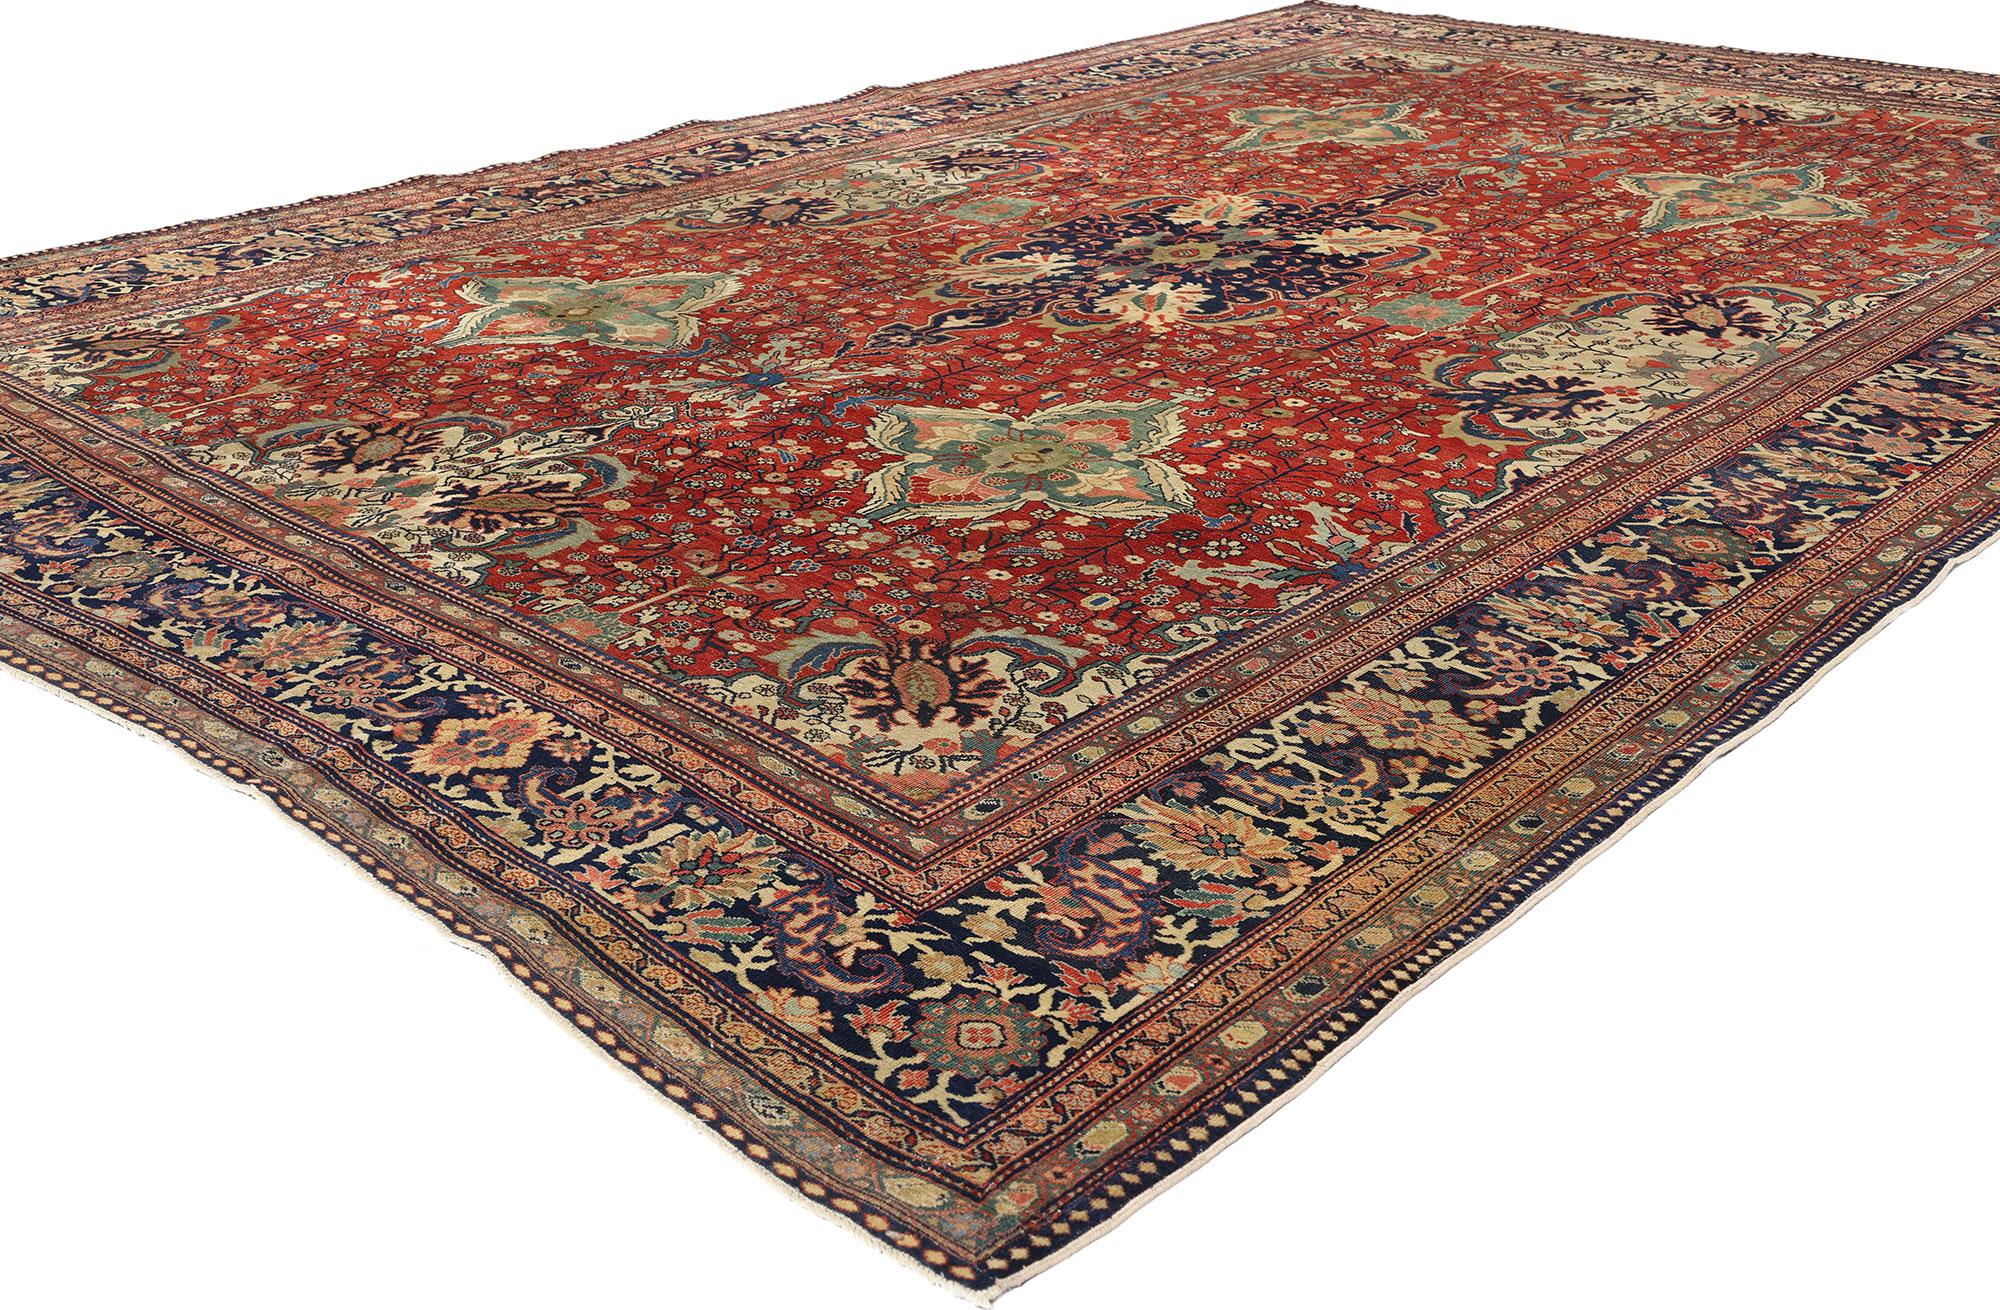 77579 Antique Persian Sarouk Farahan Rug, 08'05 x 12'06. Persian Sarouk Farahan rugs, originating from the Farahan district in central Iran, are renowned for their exquisite craftsmanship, intricate designs, and vibrant colors. Hand-knotted using